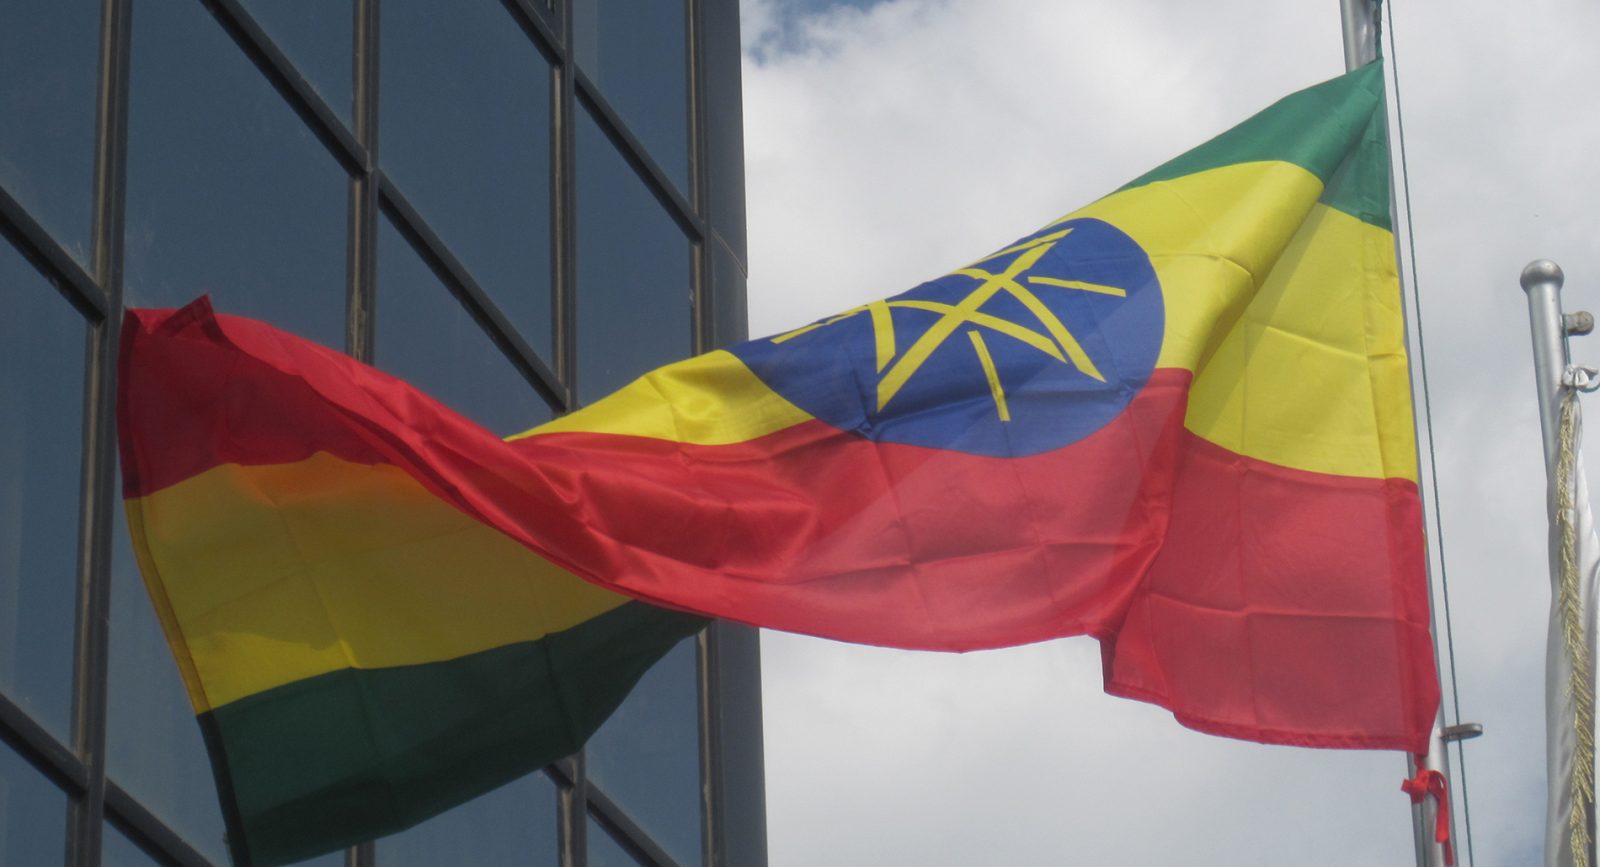 Photograph of the Ethiopian flag flying outside an unidentified official building in the country